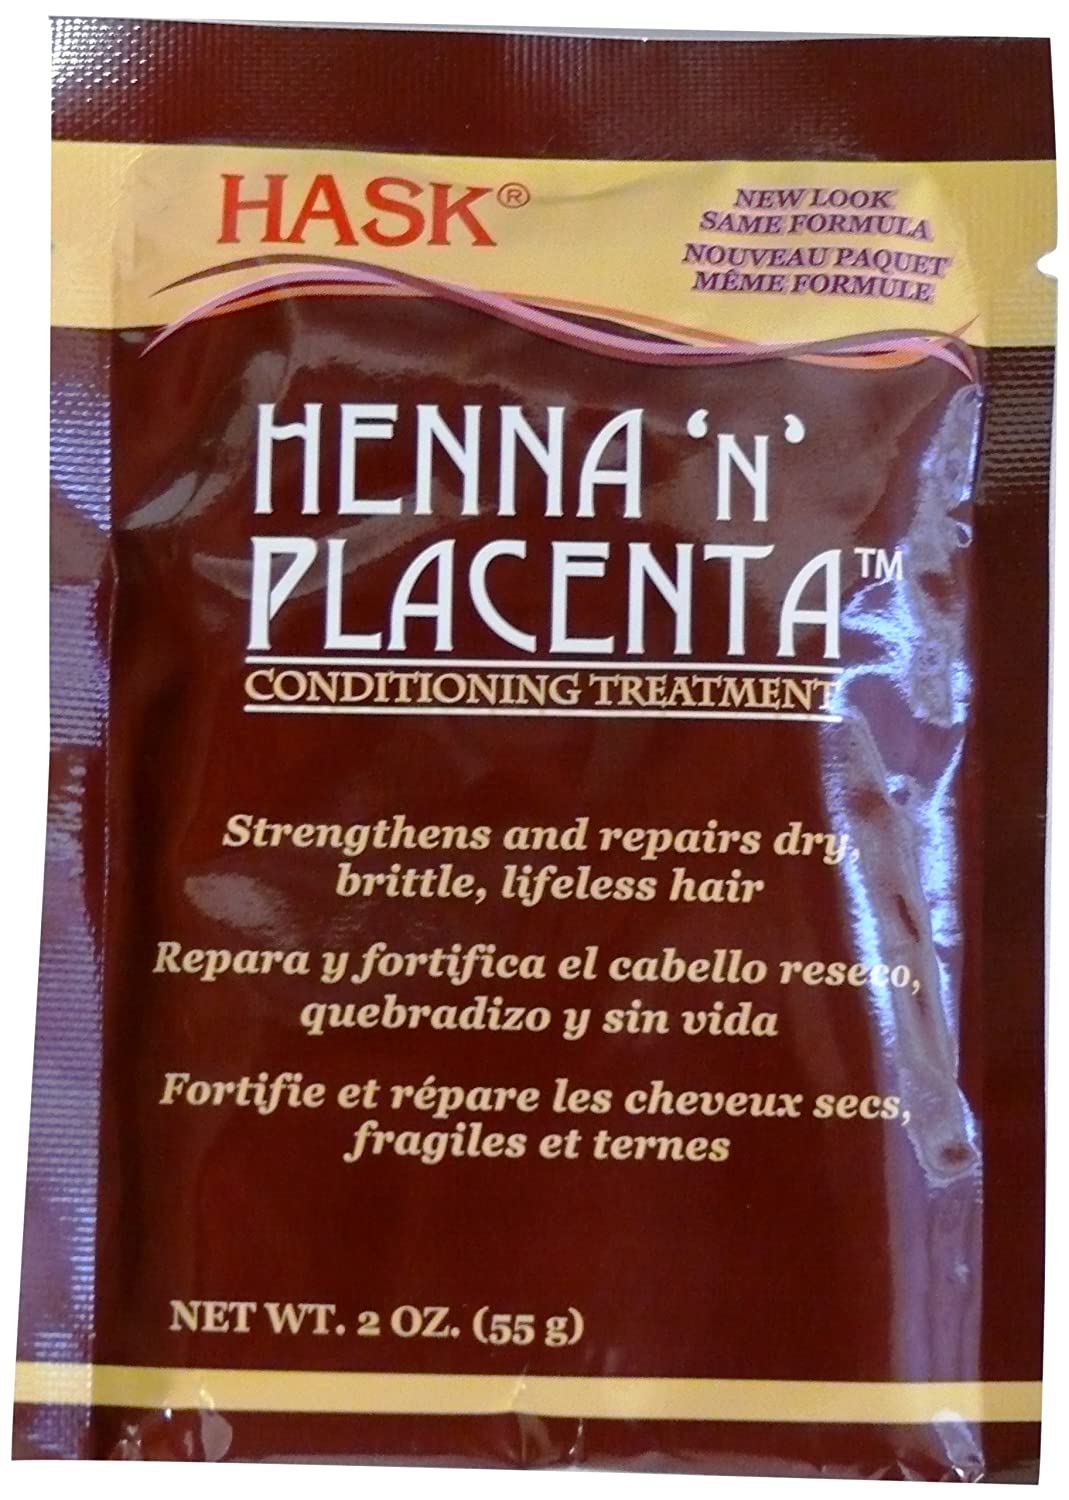 Hask Pks Henna & Placenta 2 Ounce Conditioning Treatment